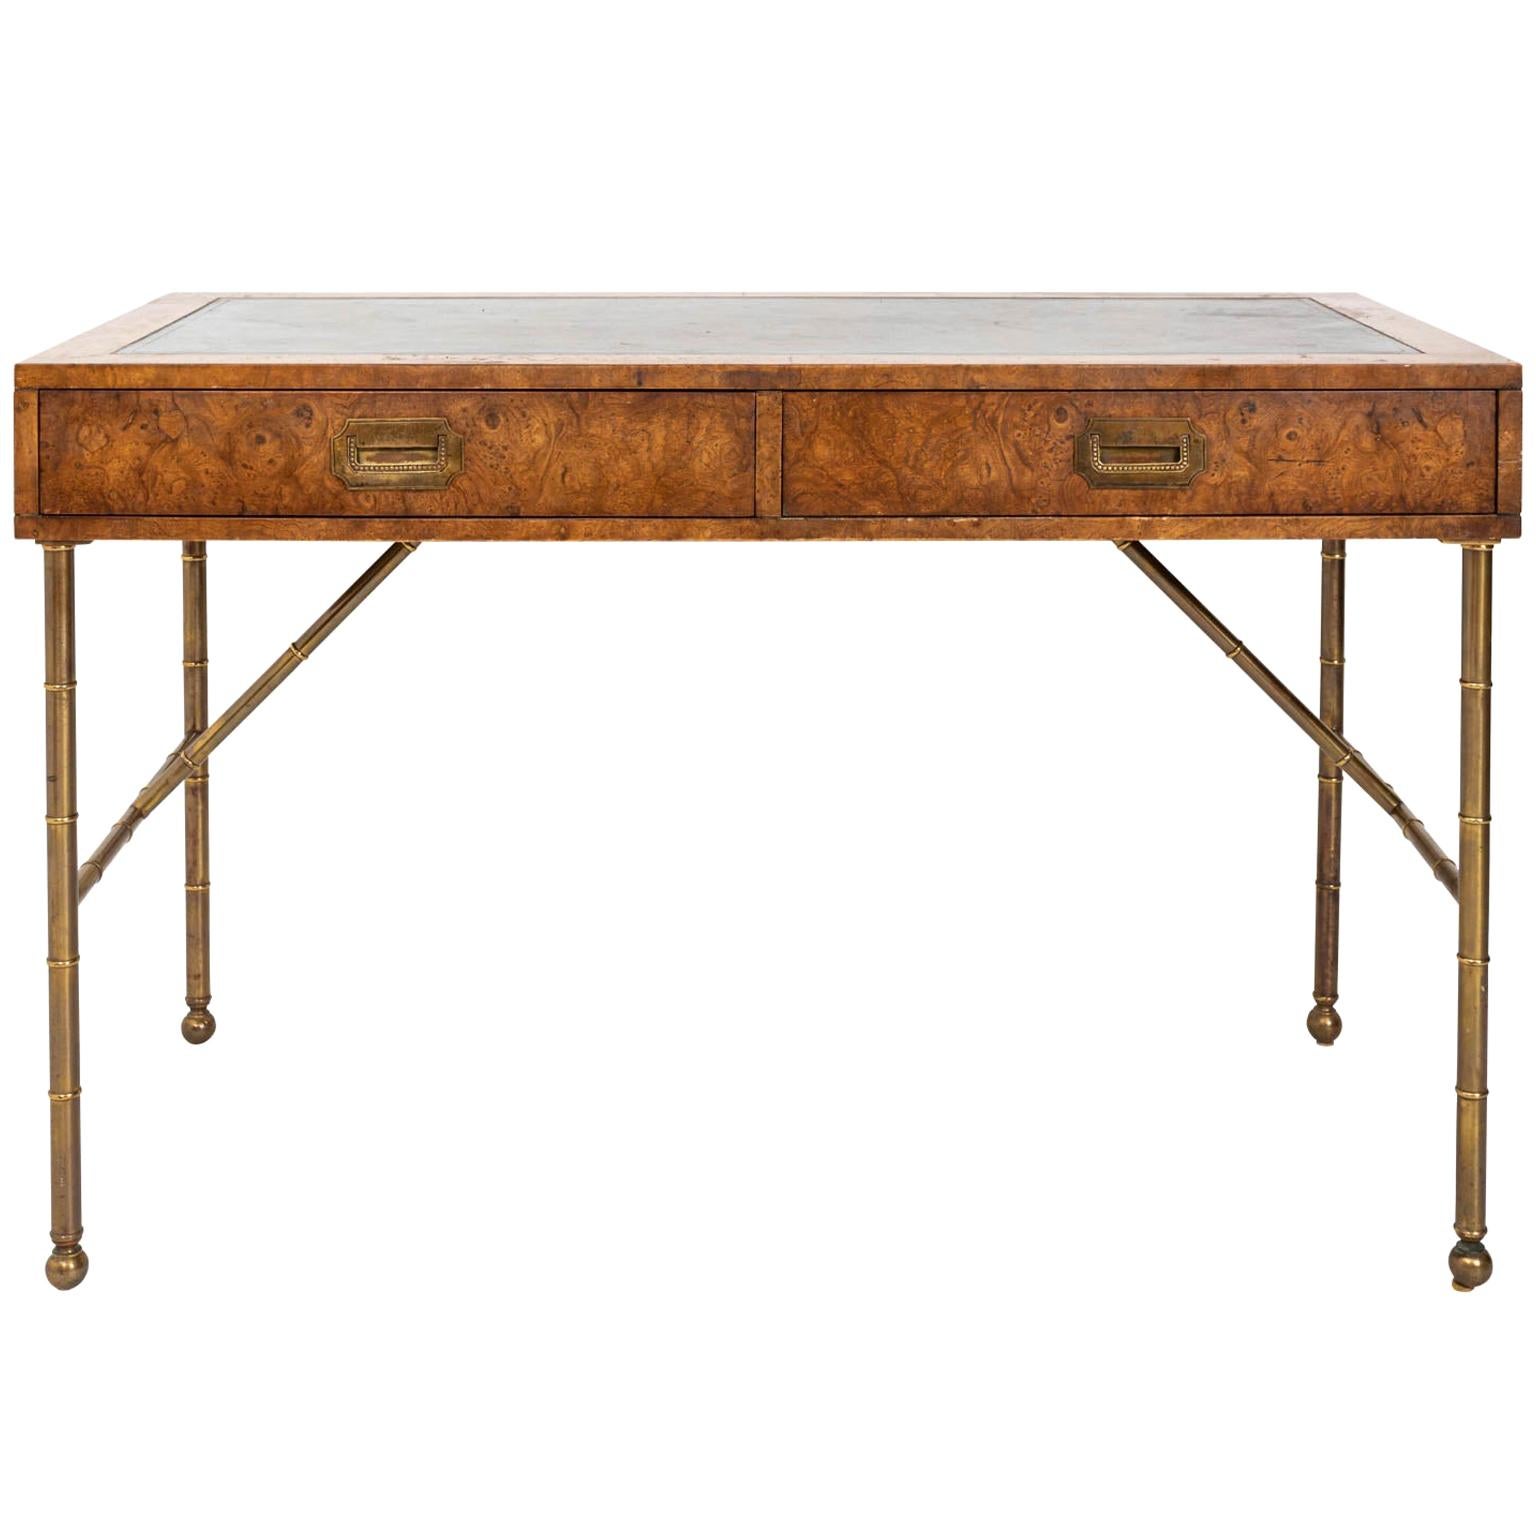 Midcentury Burlwood Desk with Leather Top by Mastercraft 